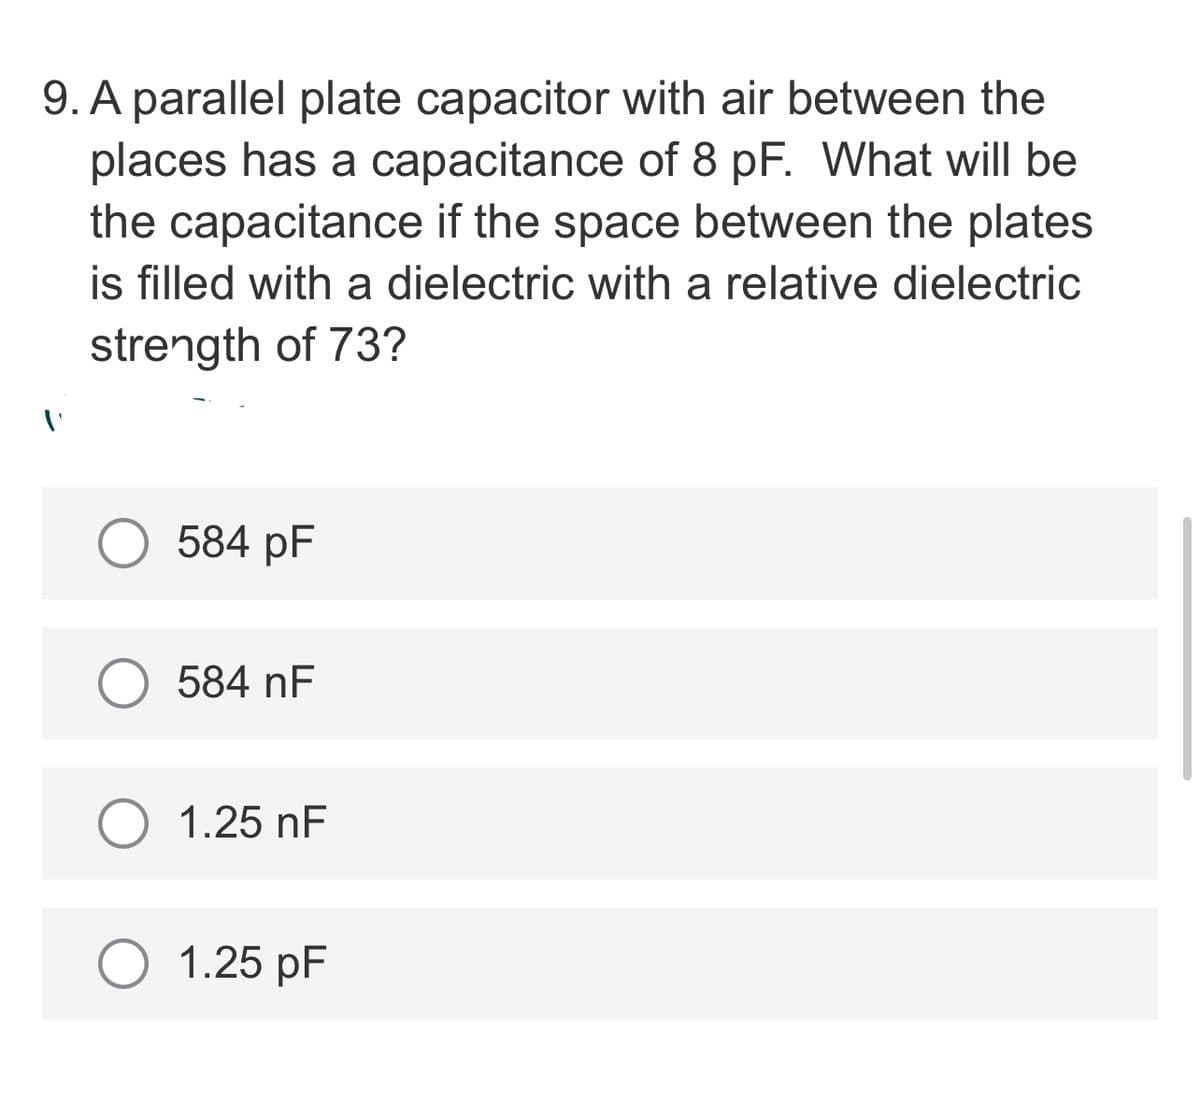 9. A parallel plate capacitor with air between the
places has a capacitance of 8 pF. What will be
the capacitance if the space between the plates
is filled with a dielectric with a relative dielectric
strength of 73?
584 pF
584 nF
1.25 nF
1.25 pF
